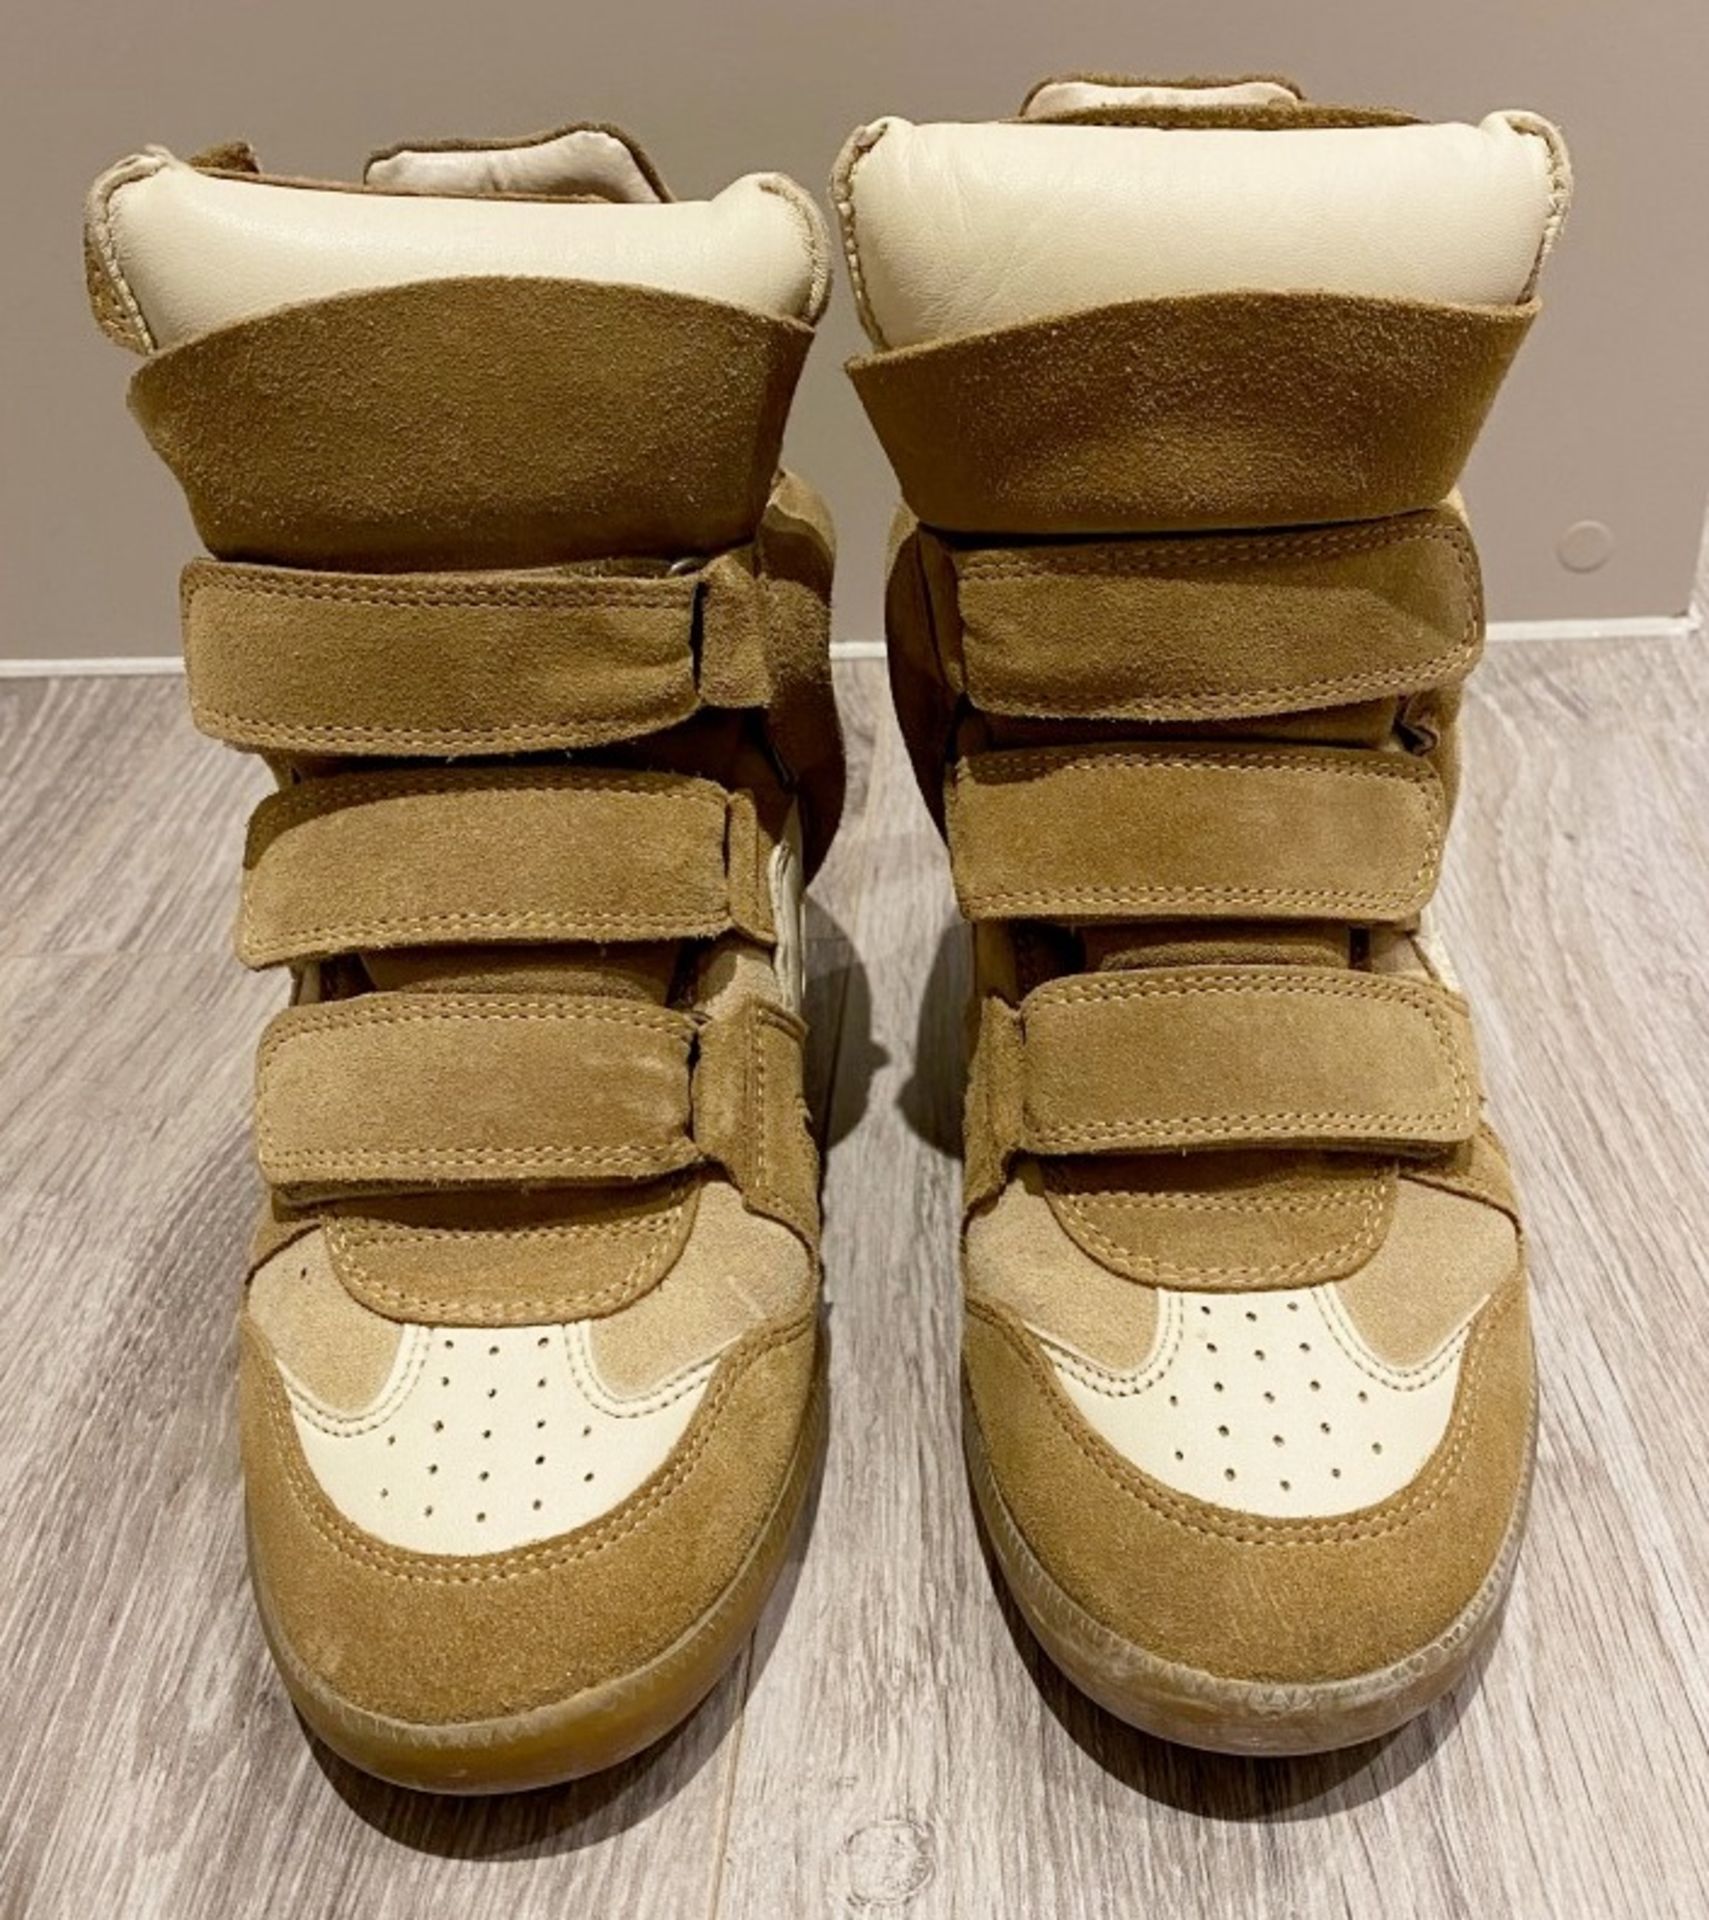 1 x Pair Of Genuine Isabel Marant Boots In Tan - Size: 36 - Preowned in Good Condition - Ref: LOT40 - Image 2 of 4